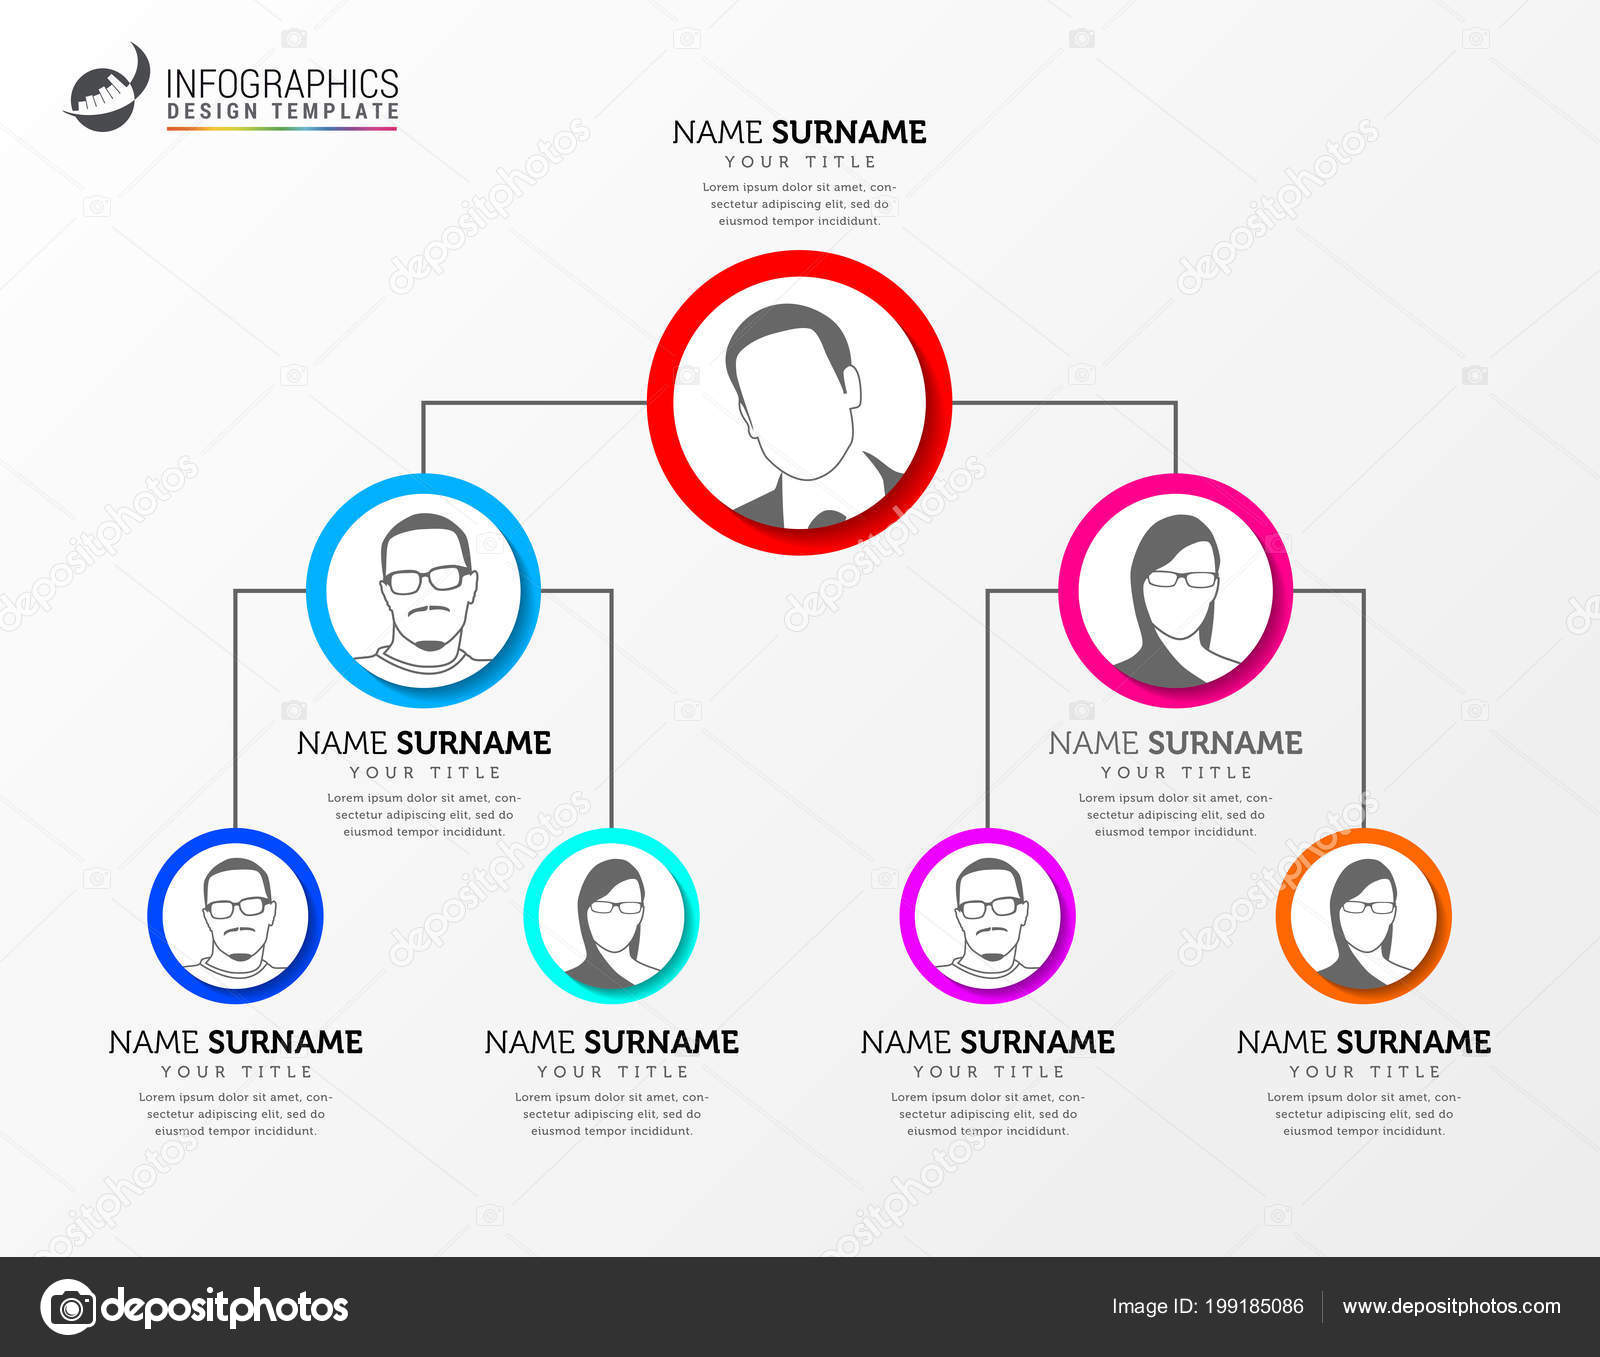 How to create a nonprofit organizational chart